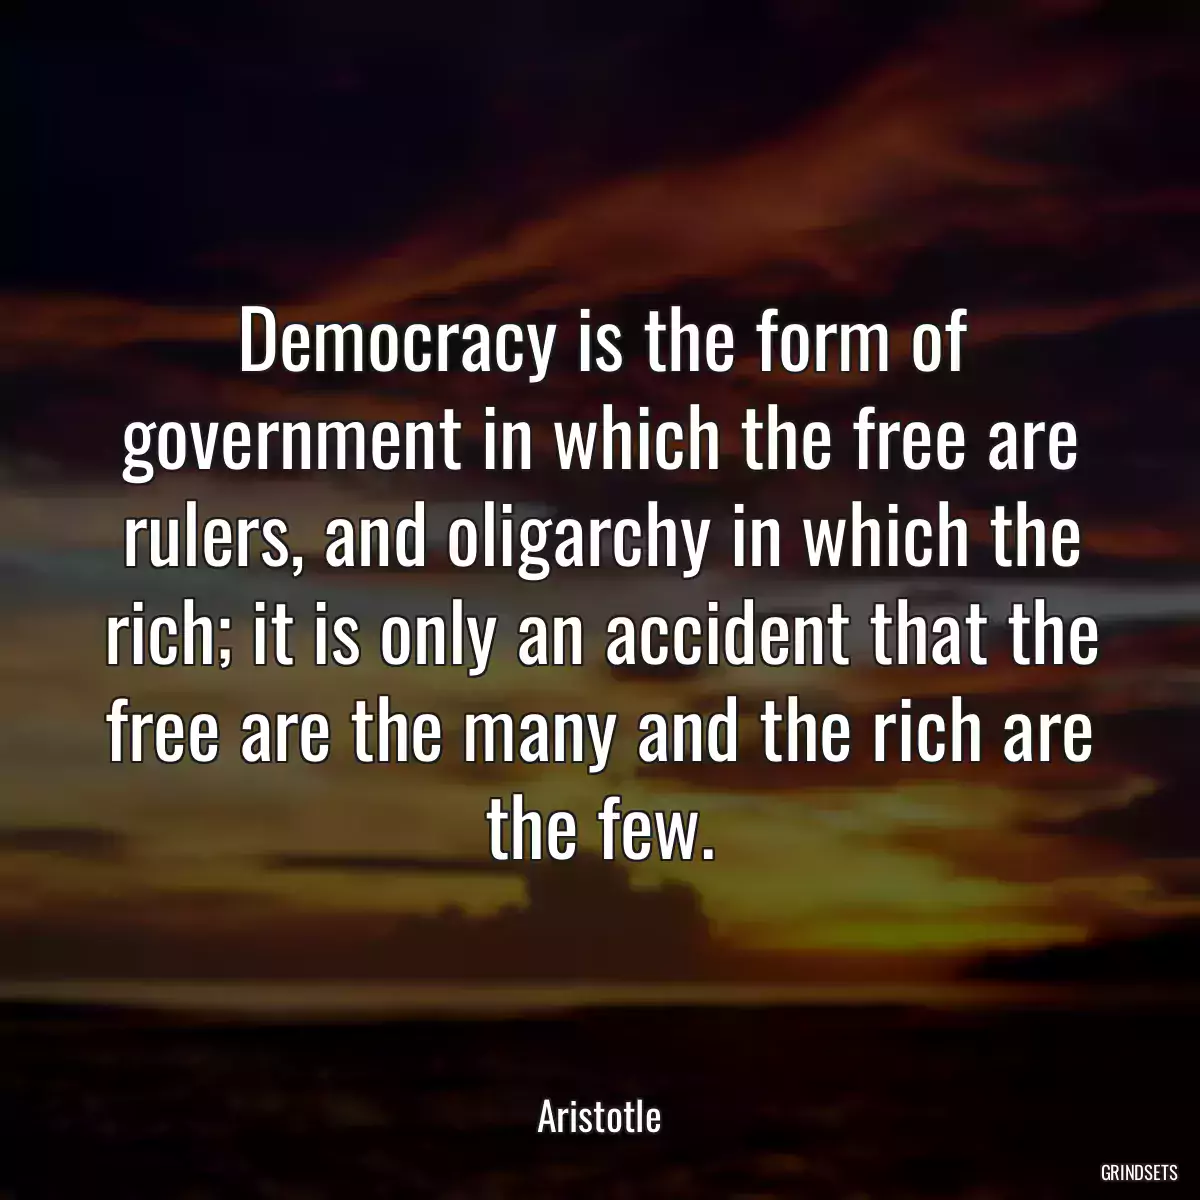 Democracy is the form of government in which the free are rulers, and oligarchy in which the rich; it is only an accident that the free are the many and the rich are the few.